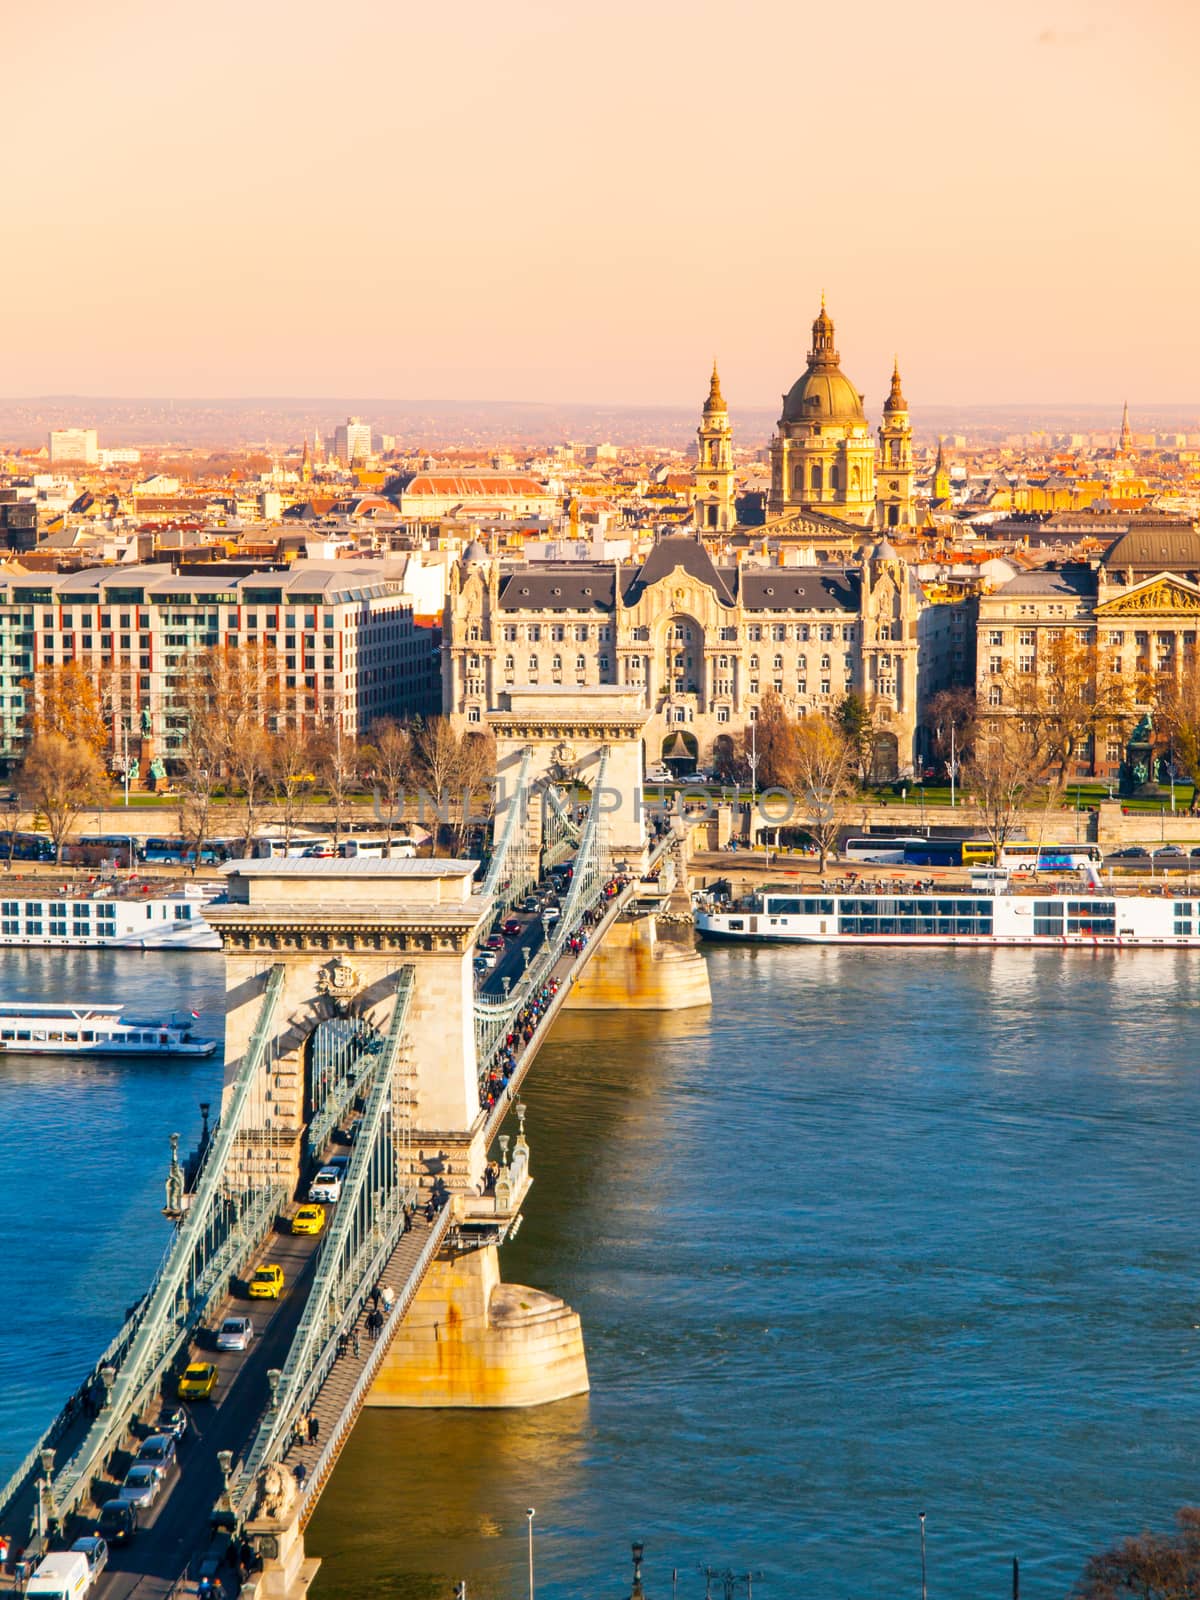 Famous Chain Bridge over Danube River and Saint Stephen's Basilica in Budapest, Hungary by pyty